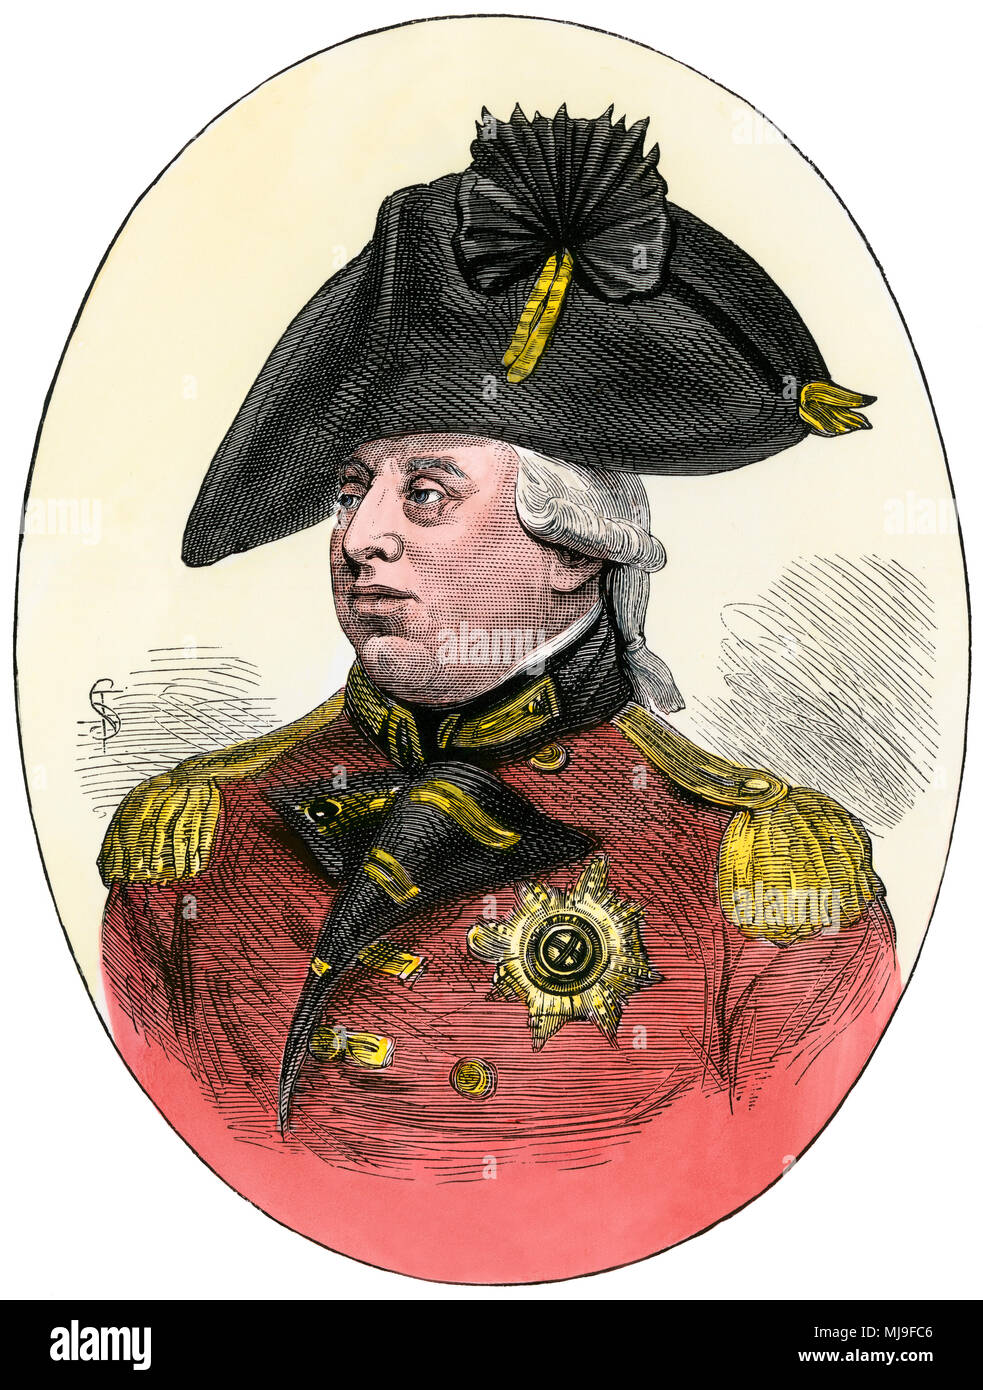 King George III in British officer's uniform. Hand-colored woodcut Stock Photo